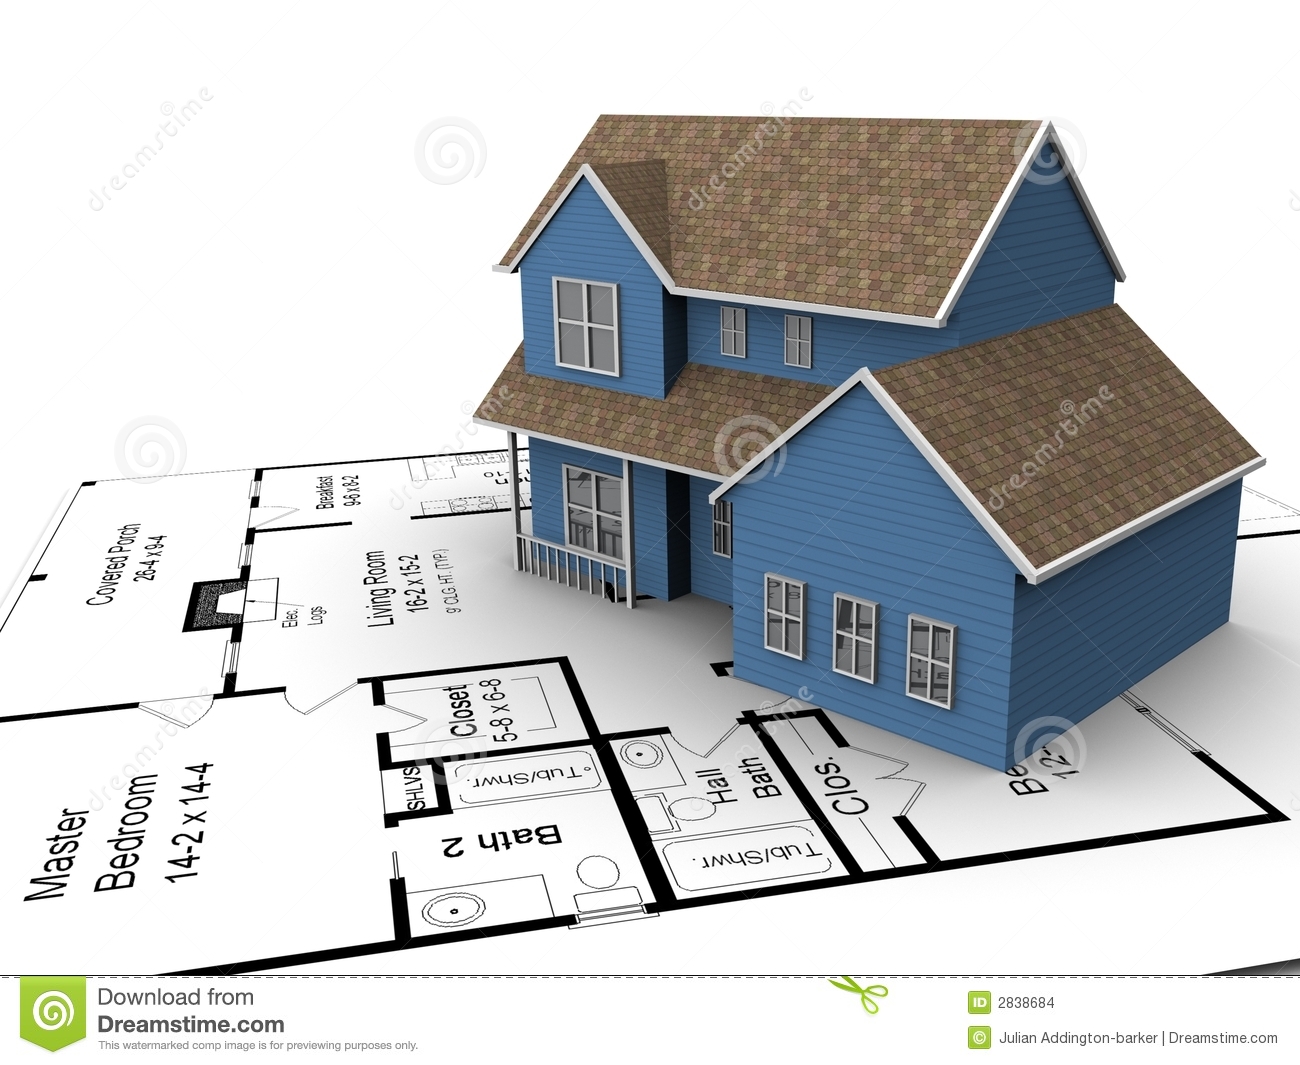 New House Plans Stock Images   Image  2838684